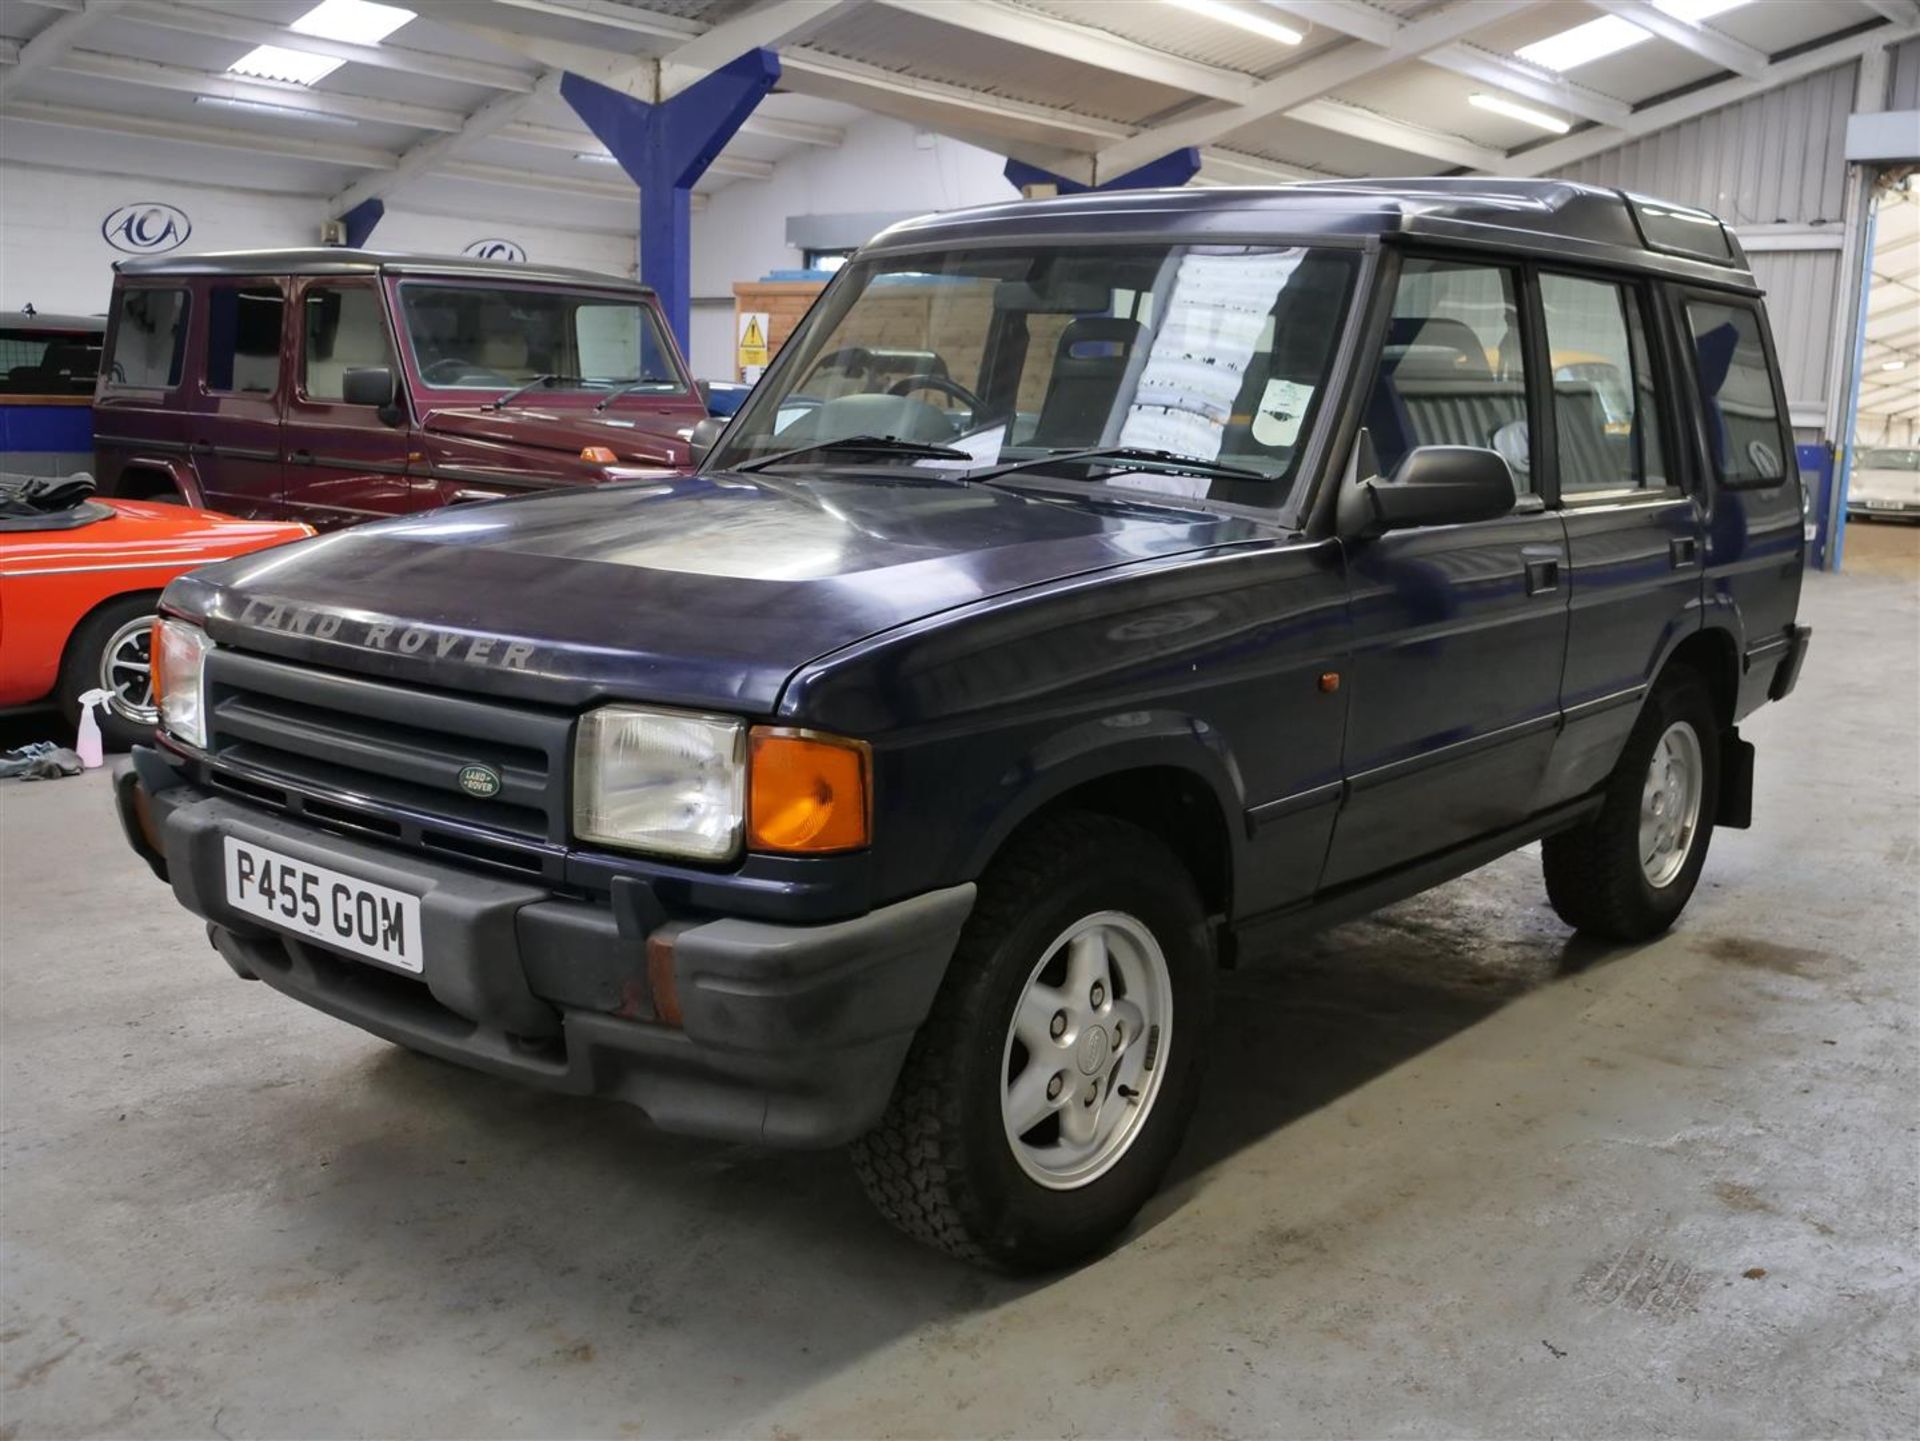 1996 Land Rover Discovery 2.5 TDI - Image 12 of 30